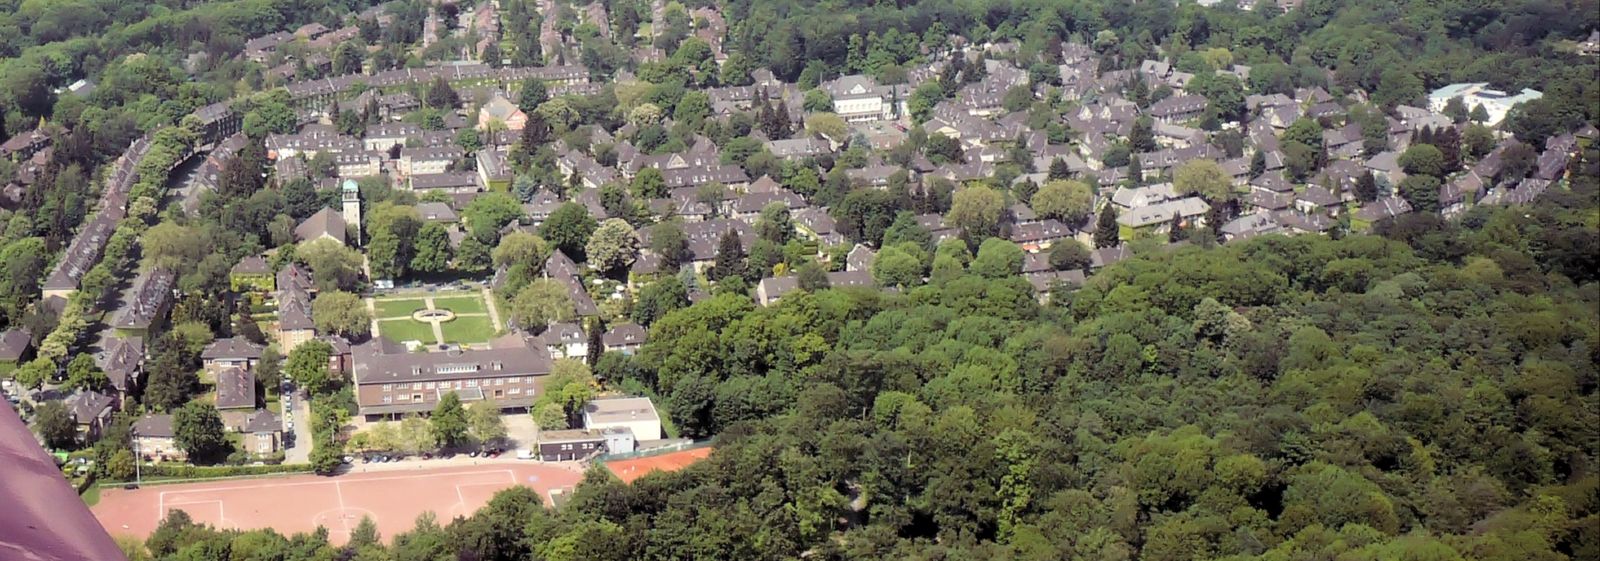 The historic Margarethenhöhe workers' housing estate in Essen in an aerial view from the southeast (2009).